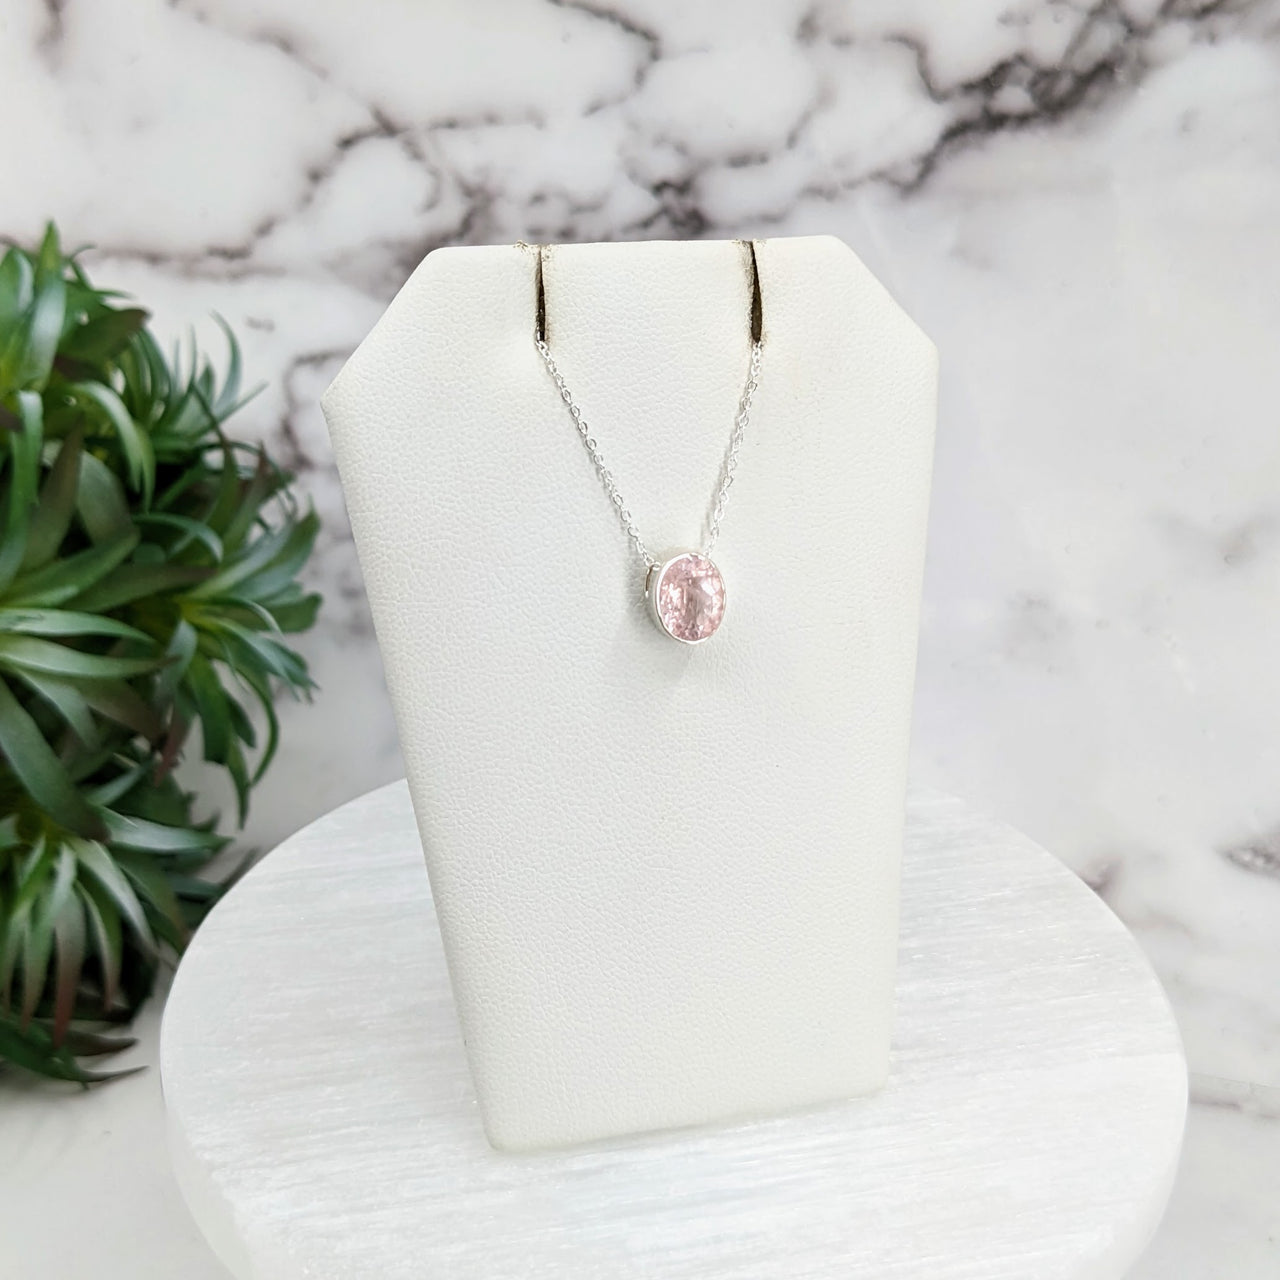 Pink Morganite Faceted Necklace Sterling Silver Slider Pendant on 18" Chain #LV3252